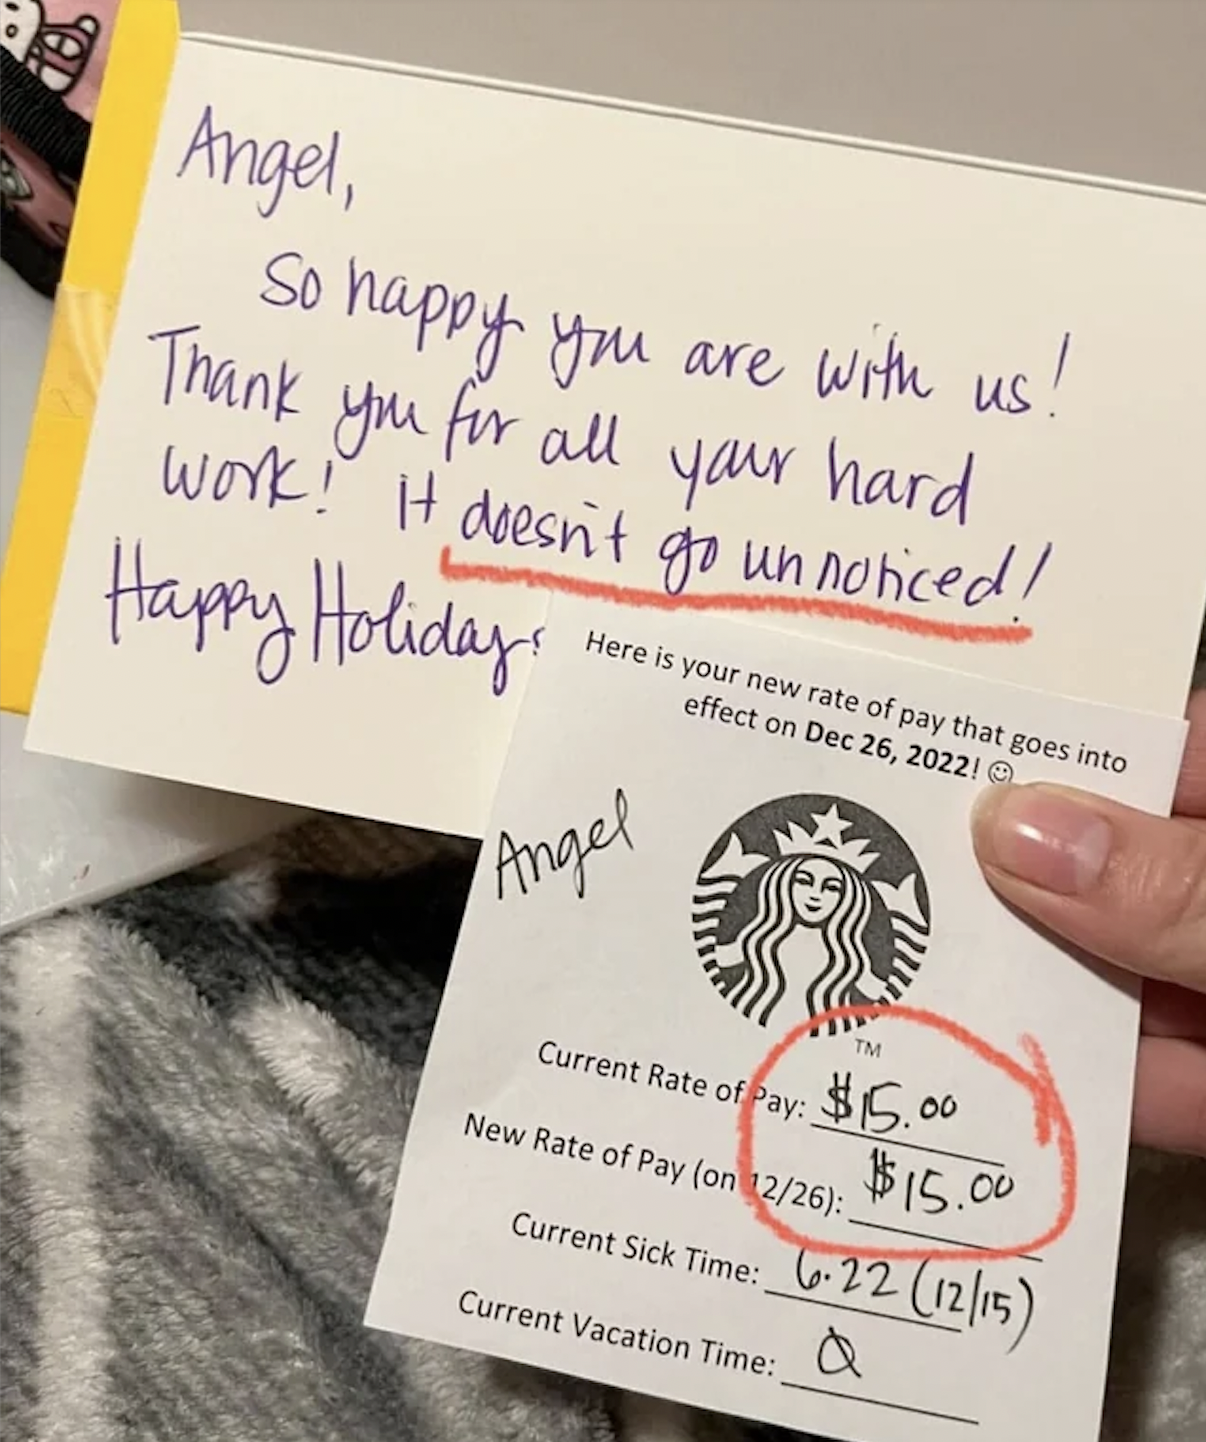 writing - 18, Angel, So happy you are with us! Thank you for all your hard work! It doesn't go un noticed! Happy Holidays Angel Here is your new rate of pay that goes into effect on 1 Current Rate of Pay New Rate of Pay on 1226 Tm $15.00 $15.00 Current Si